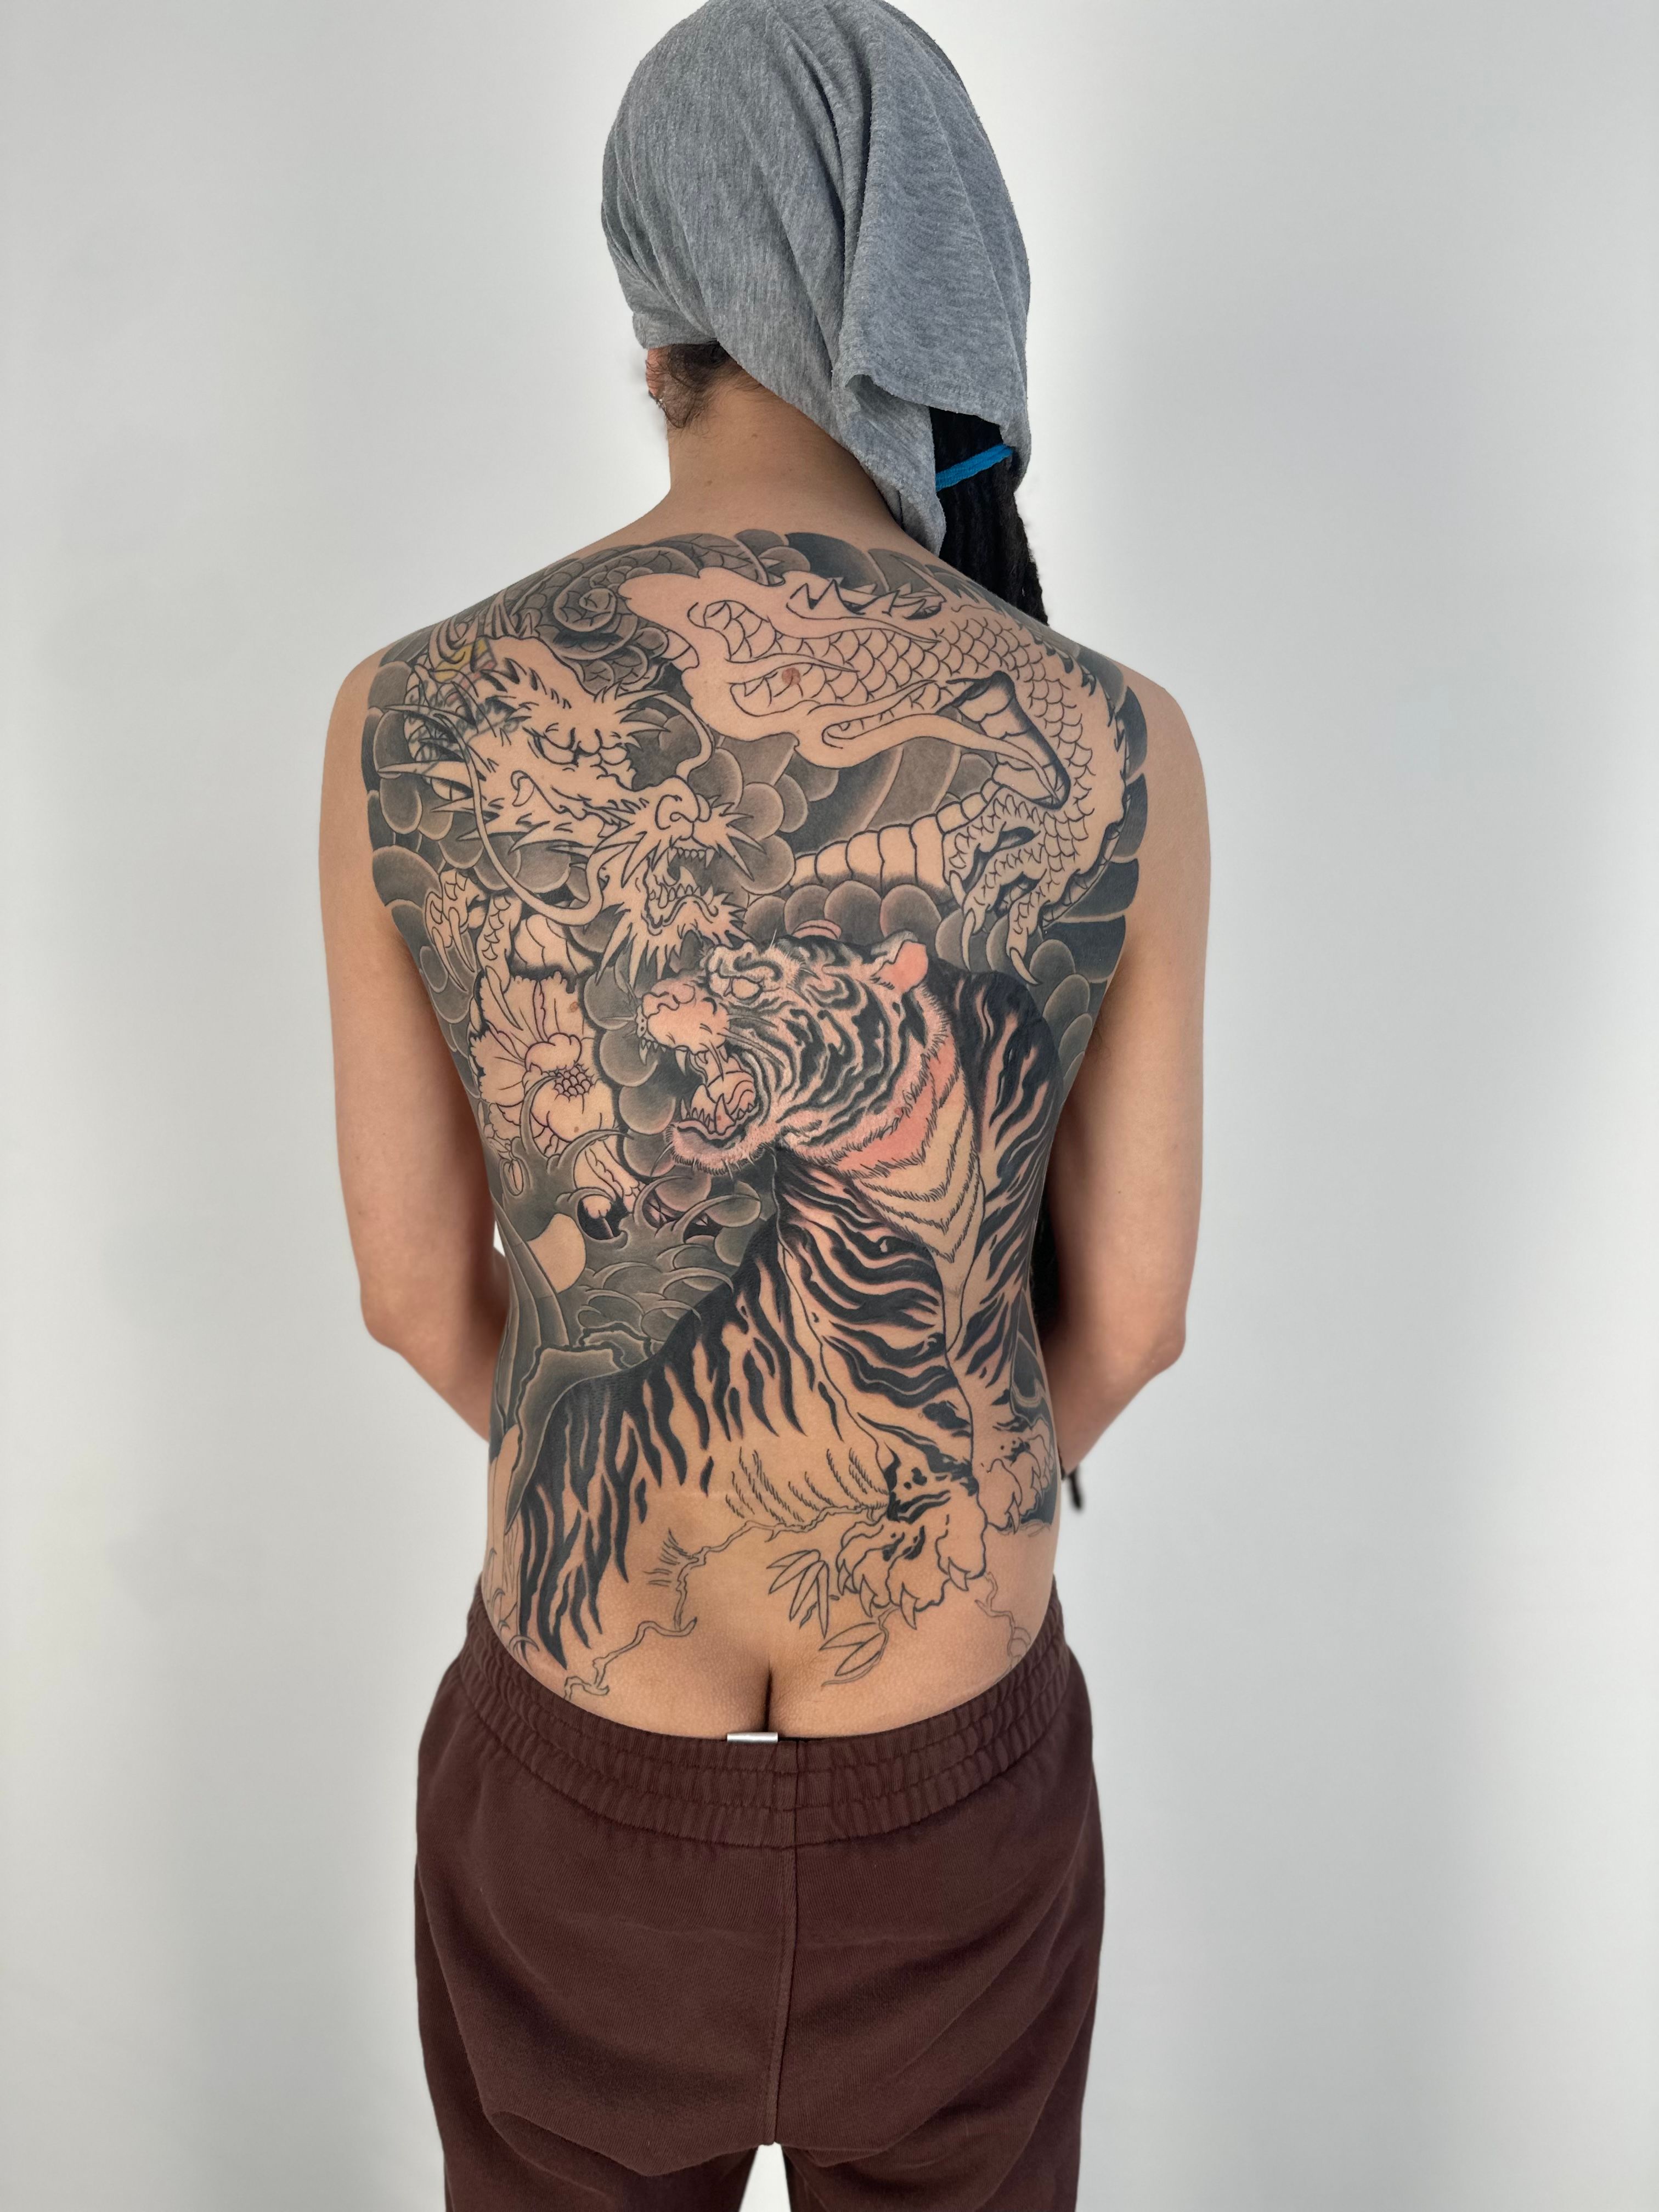 Outline tattoo of a dragon and tiger lily flower on Craiyon